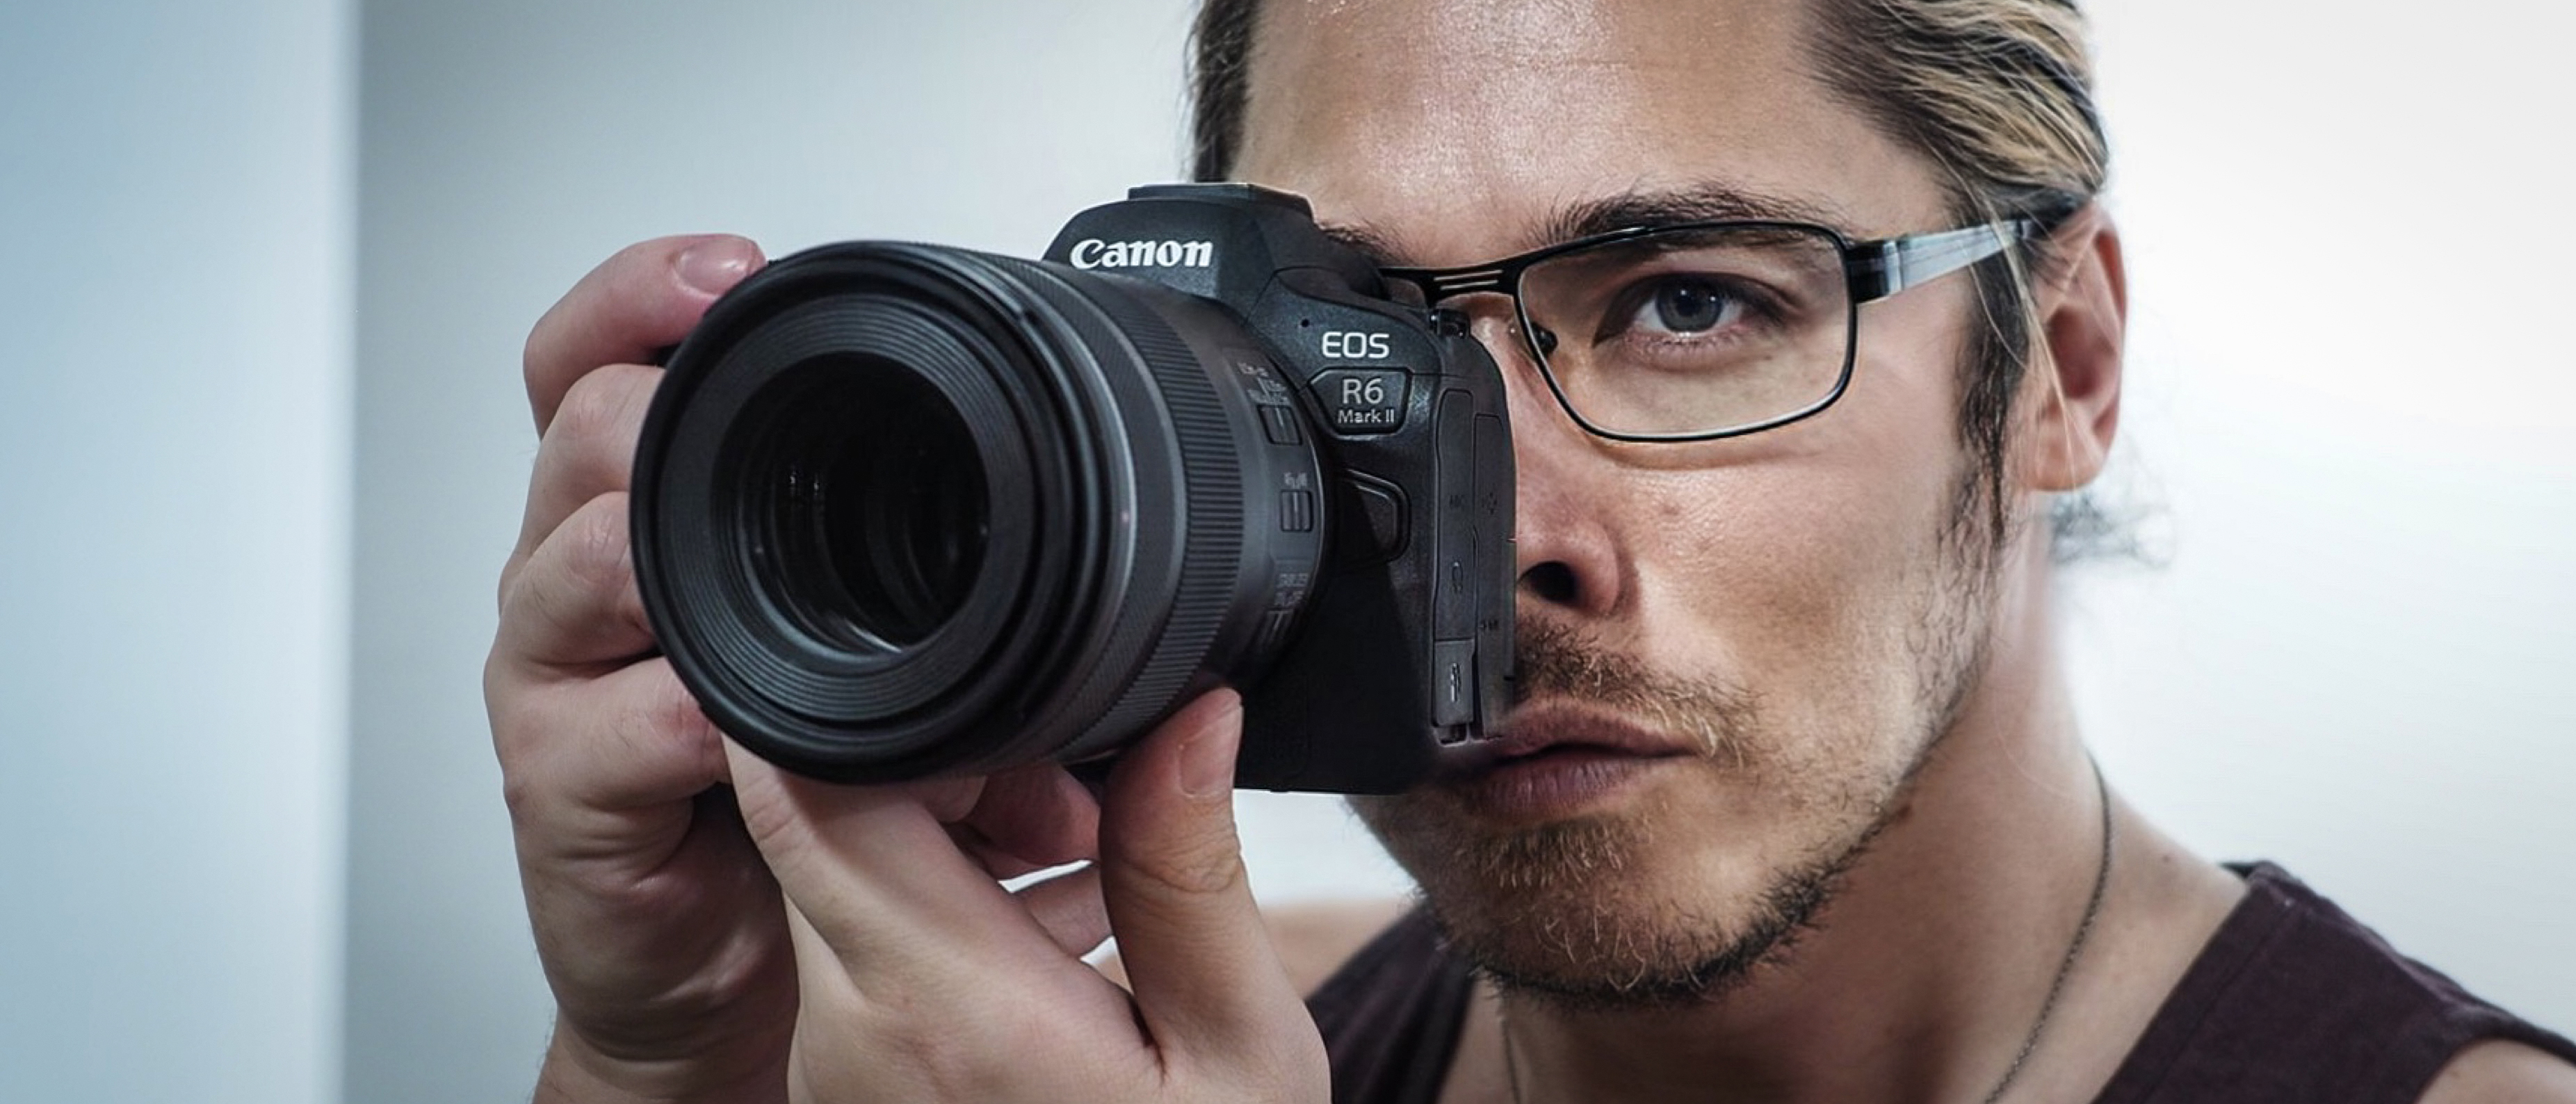 Canon EOS R6 Mark II Review